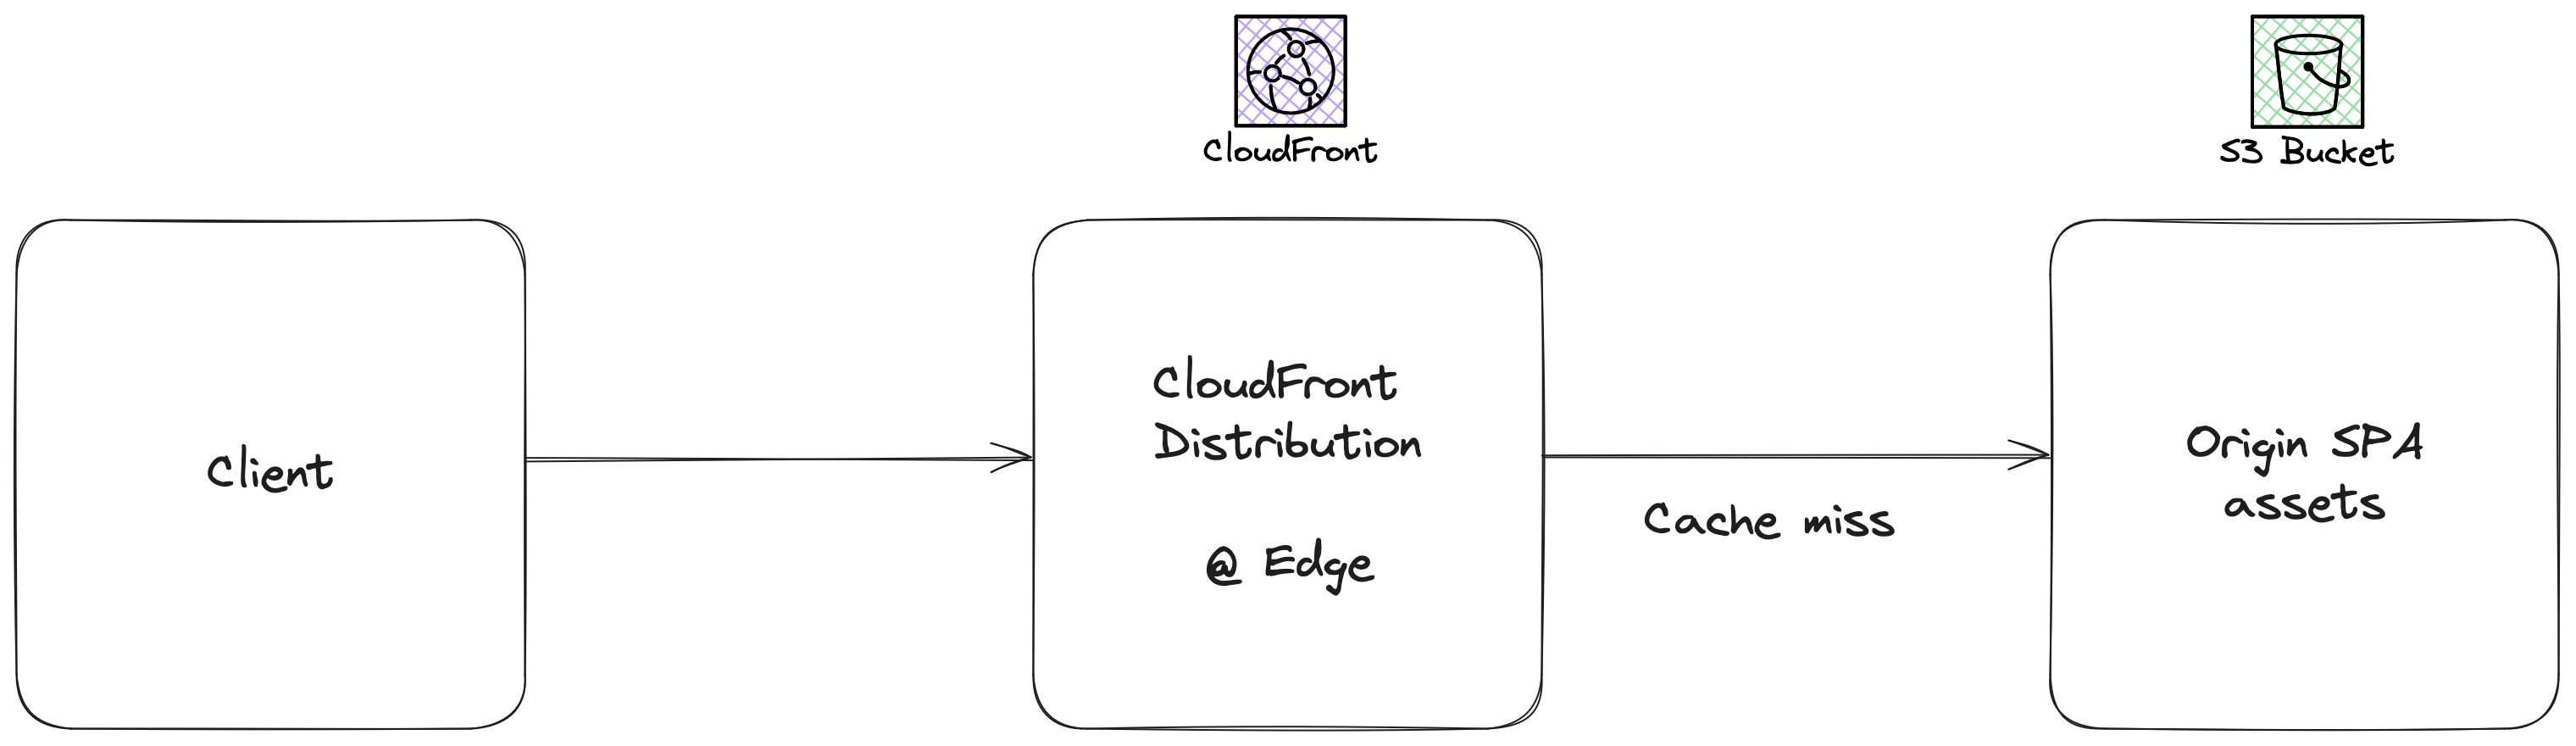 CloudFront and S3 Architecture Diagram